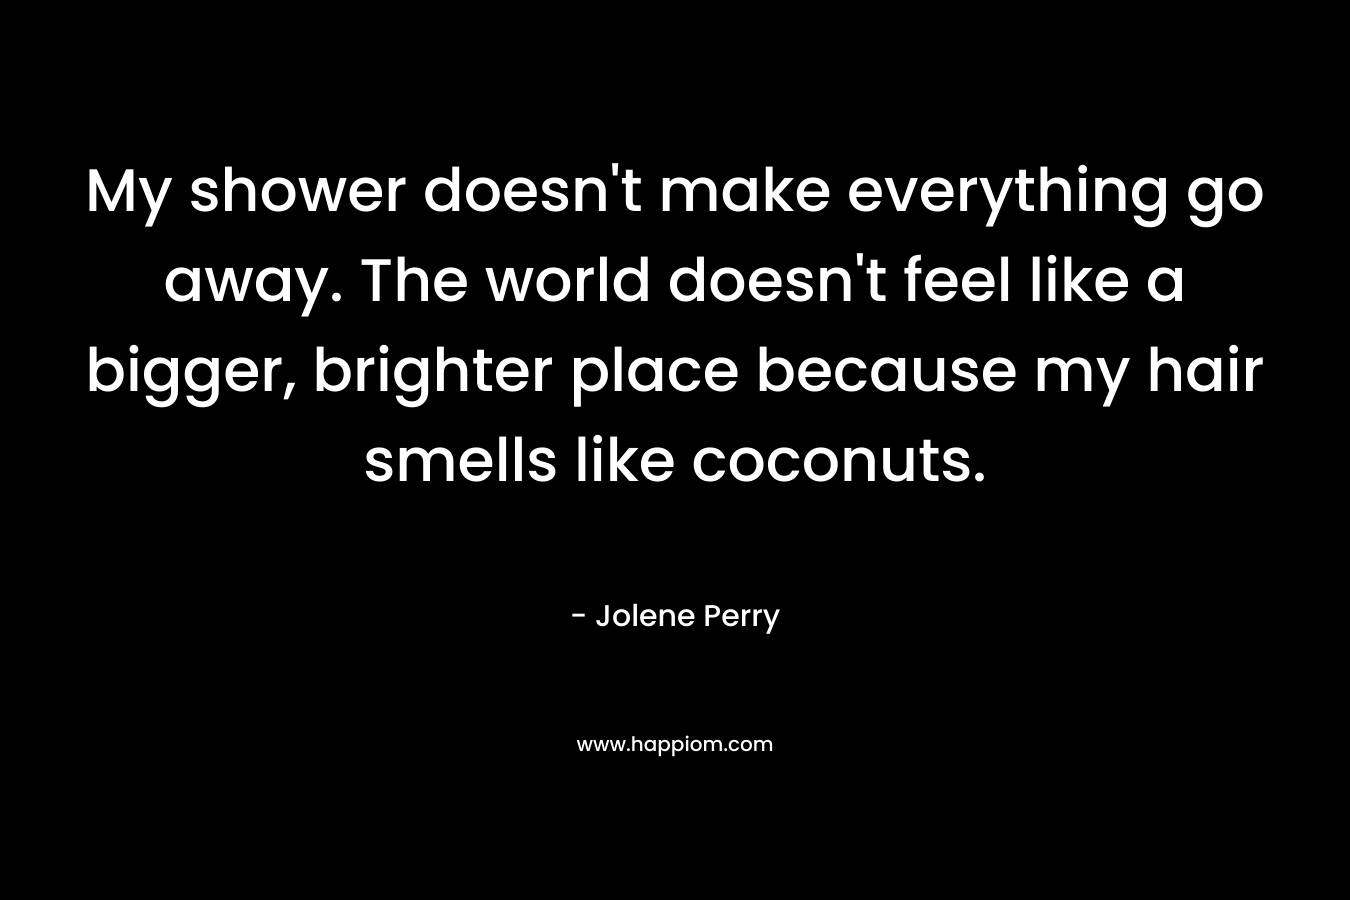 My shower doesn’t make everything go away. The world doesn’t feel like a bigger, brighter place because my hair smells like coconuts. – Jolene Perry